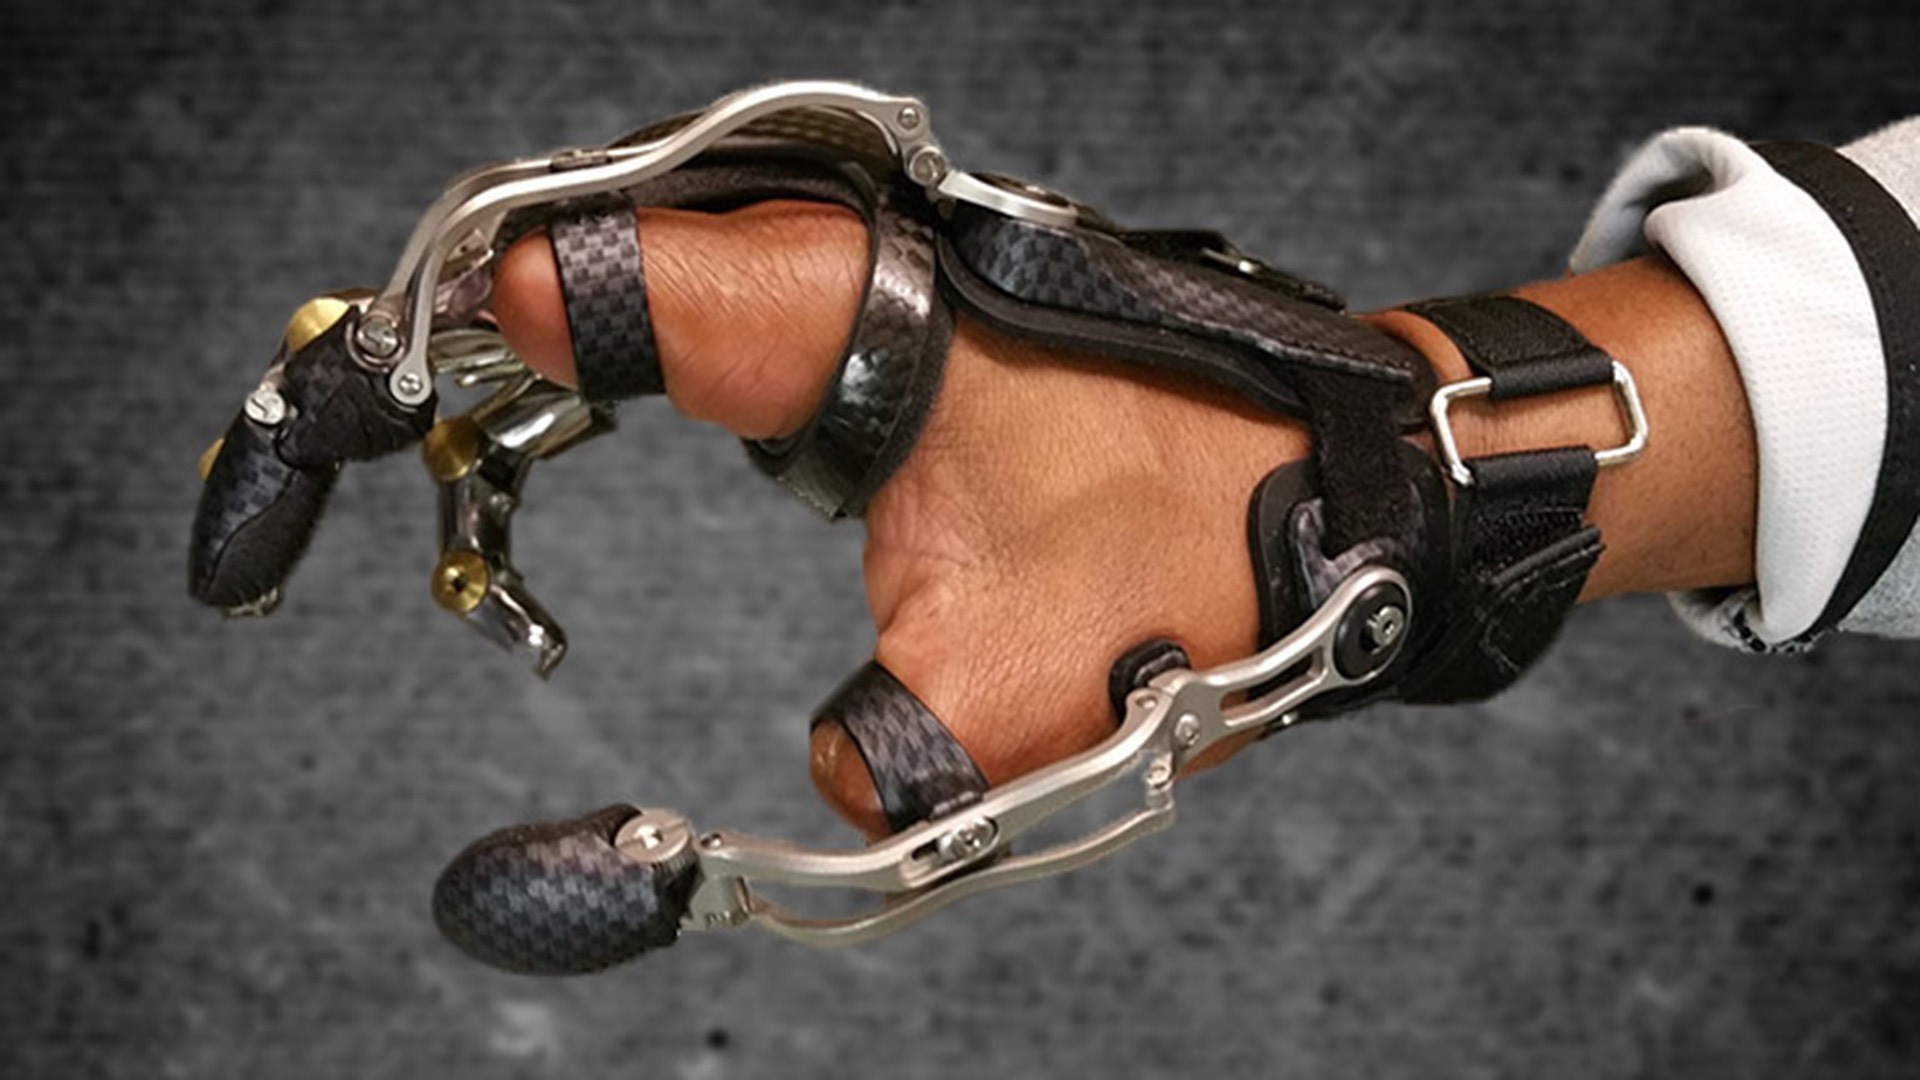 Functional prosthesis designed for people with partial finger amputations, 2019-05-07